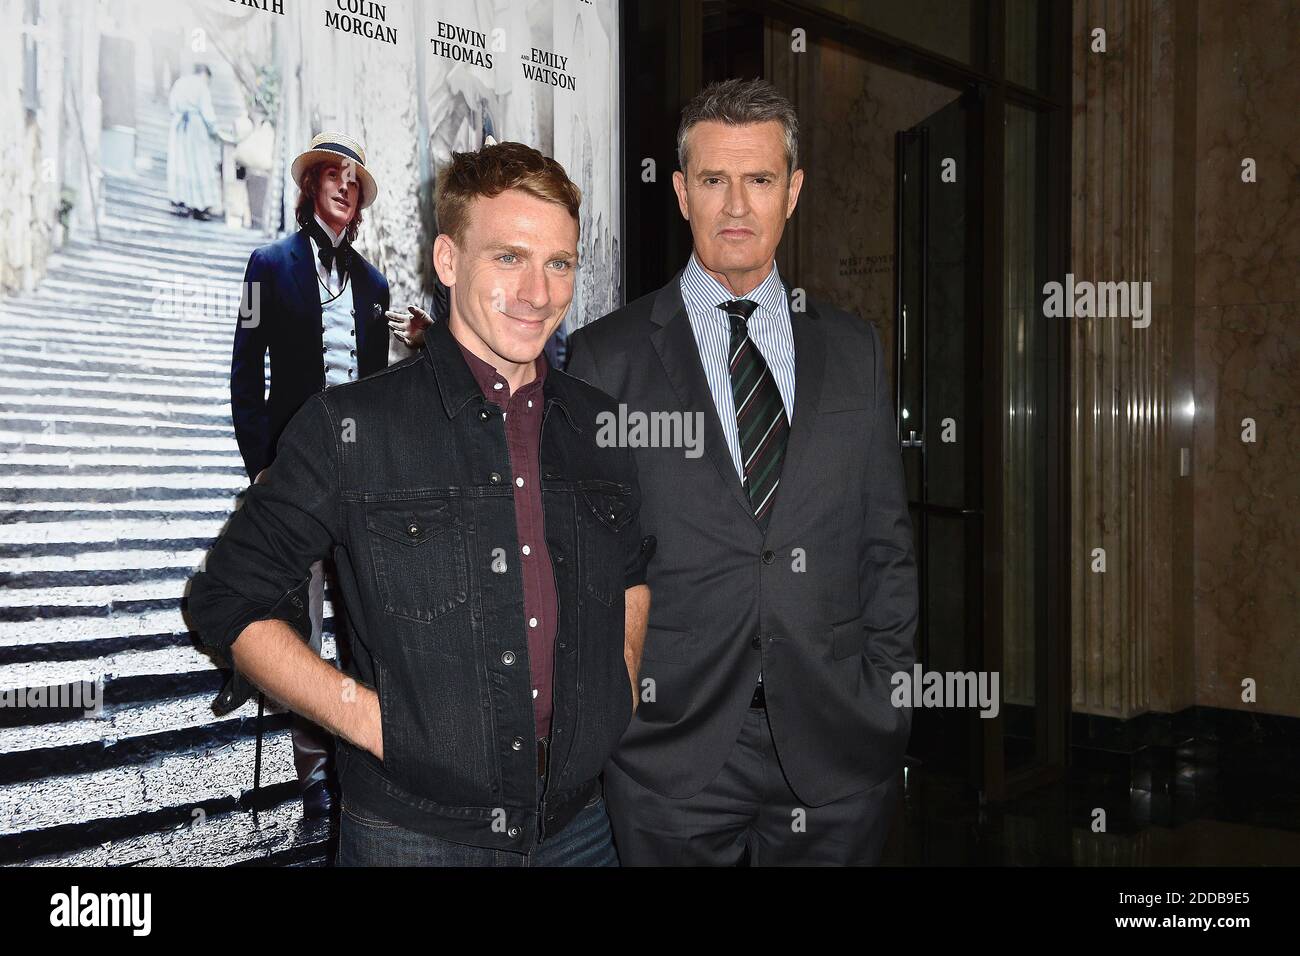 Rupert Everett and Edwin Thomas attend the LA Film Festival Gala Screening of The Happy Prince at the Wallis Annenberg Center For The Performing Arts on September 25, 2018 in Beverly Hills, CA, USA. Photo by Lionel Hahn/ABACAPRESS.COM Stock Photo